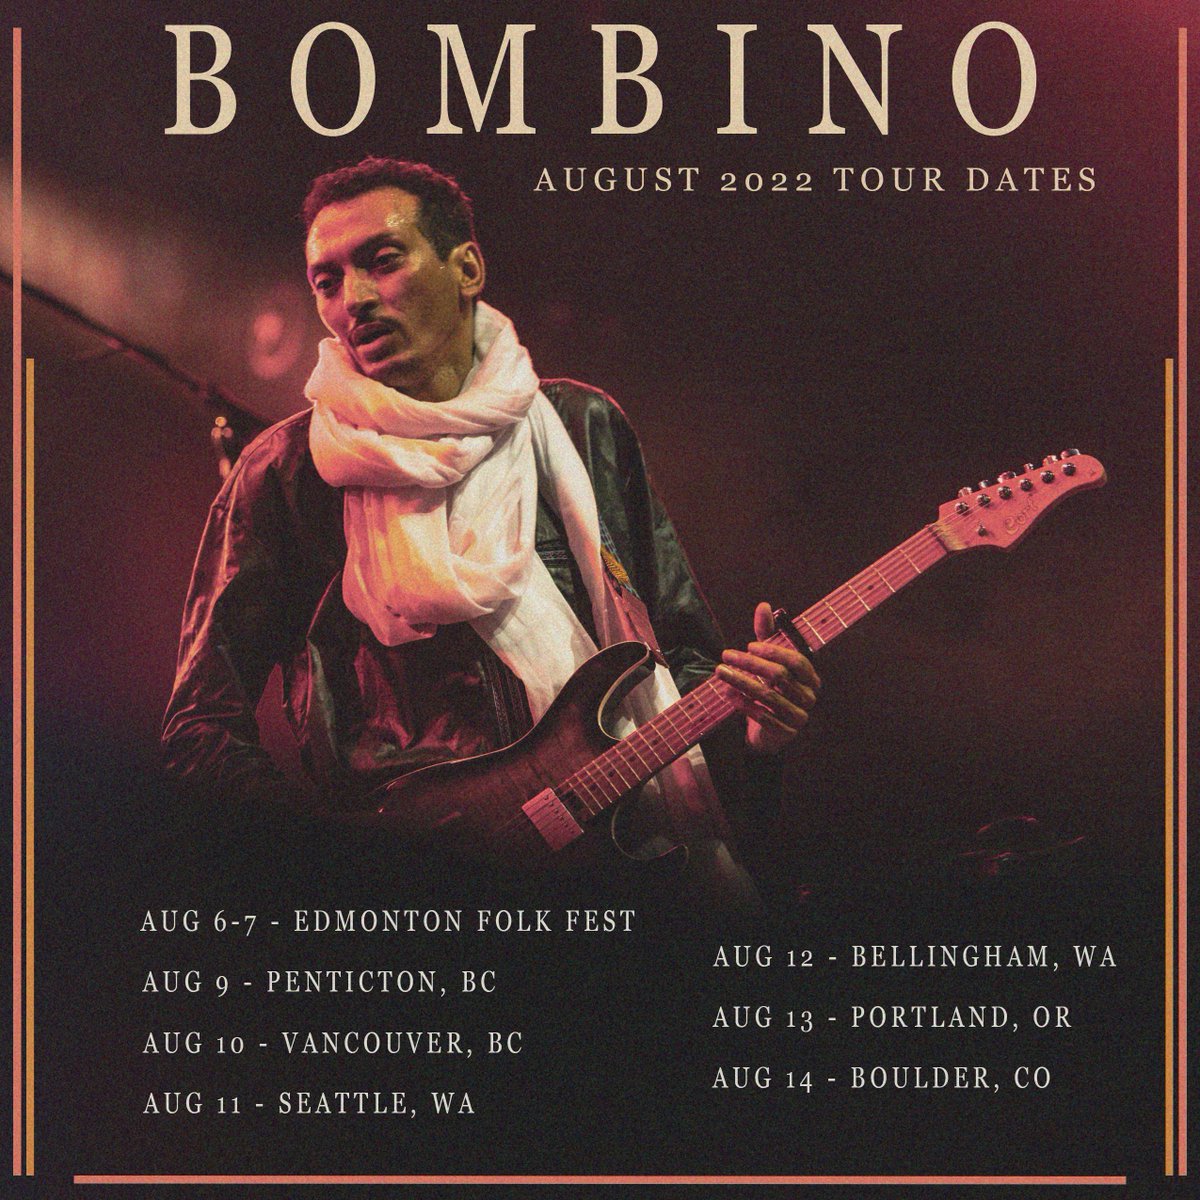 We would love to see you at our upcoming #tour dates on the West Coast of #Canada and the #US. More info at bombinomusic.com/tour! @edmfolkfest @DreamCafeMusic @HollywoodYVR @thecrocodile @WildBuffalo @StarTheaterPDX @BoulderTheater